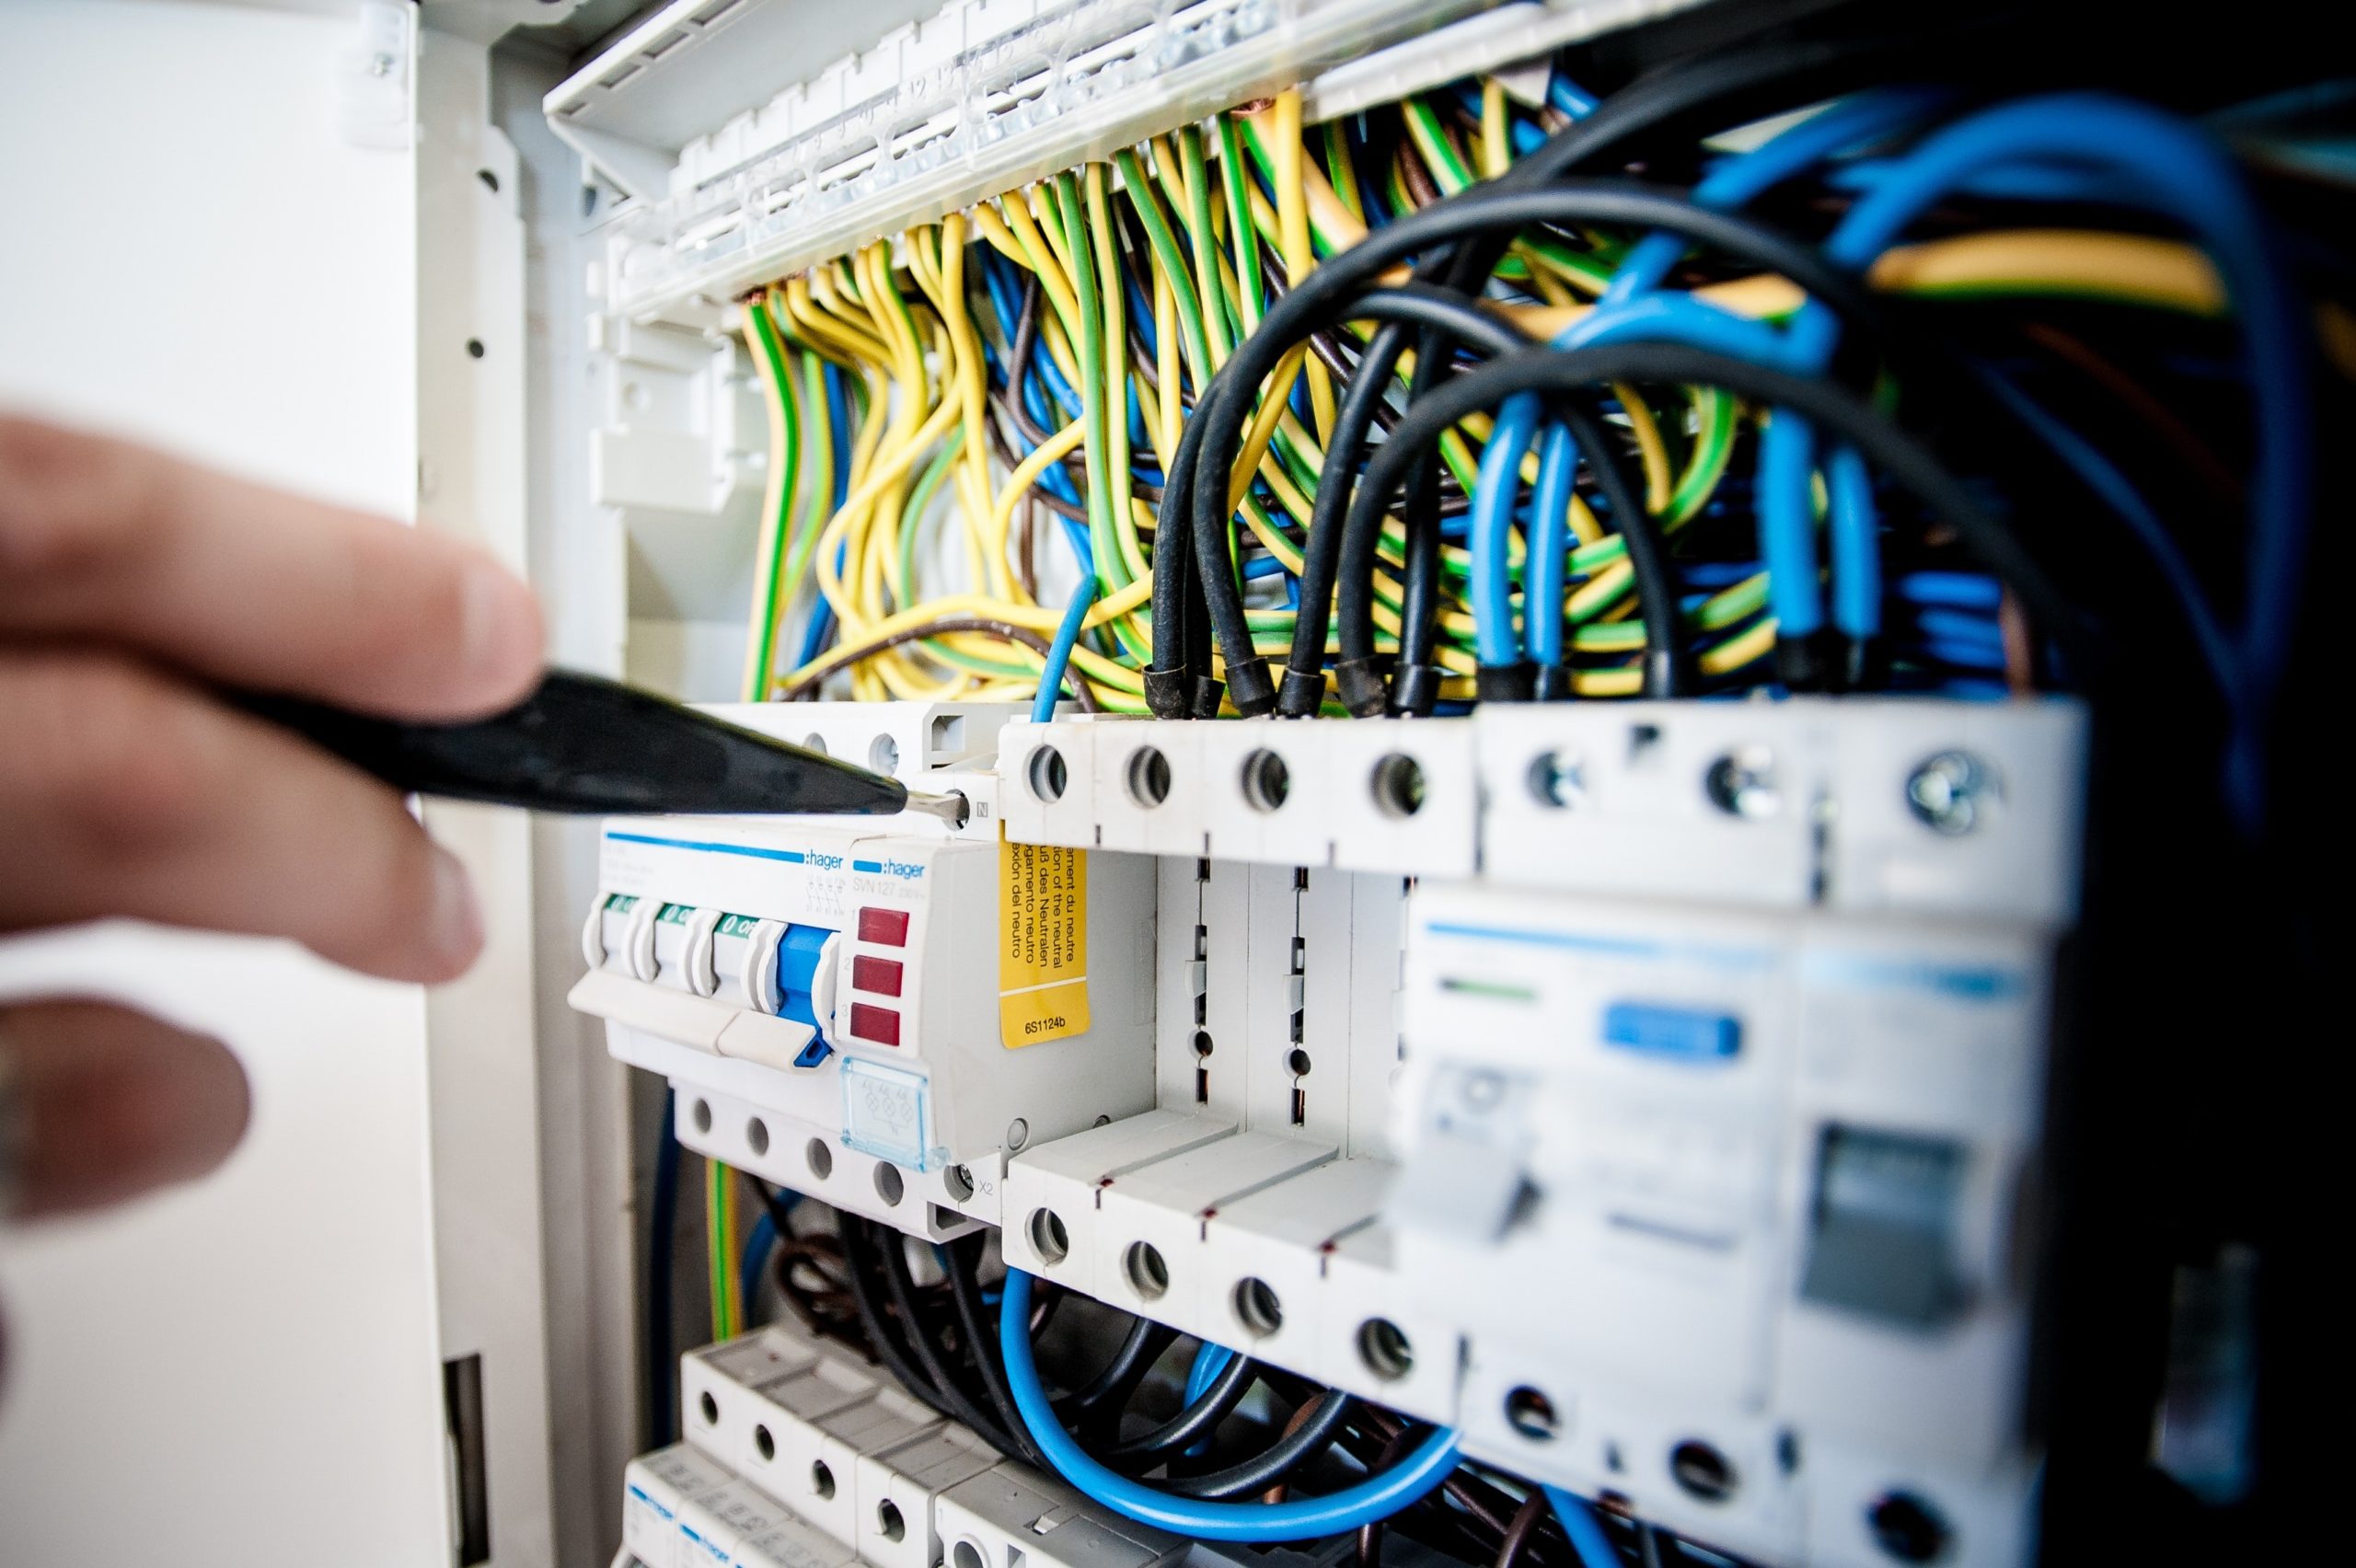 Read more about SFCC to offer Level 1 Industrial Electrical Maintenance Technical Training